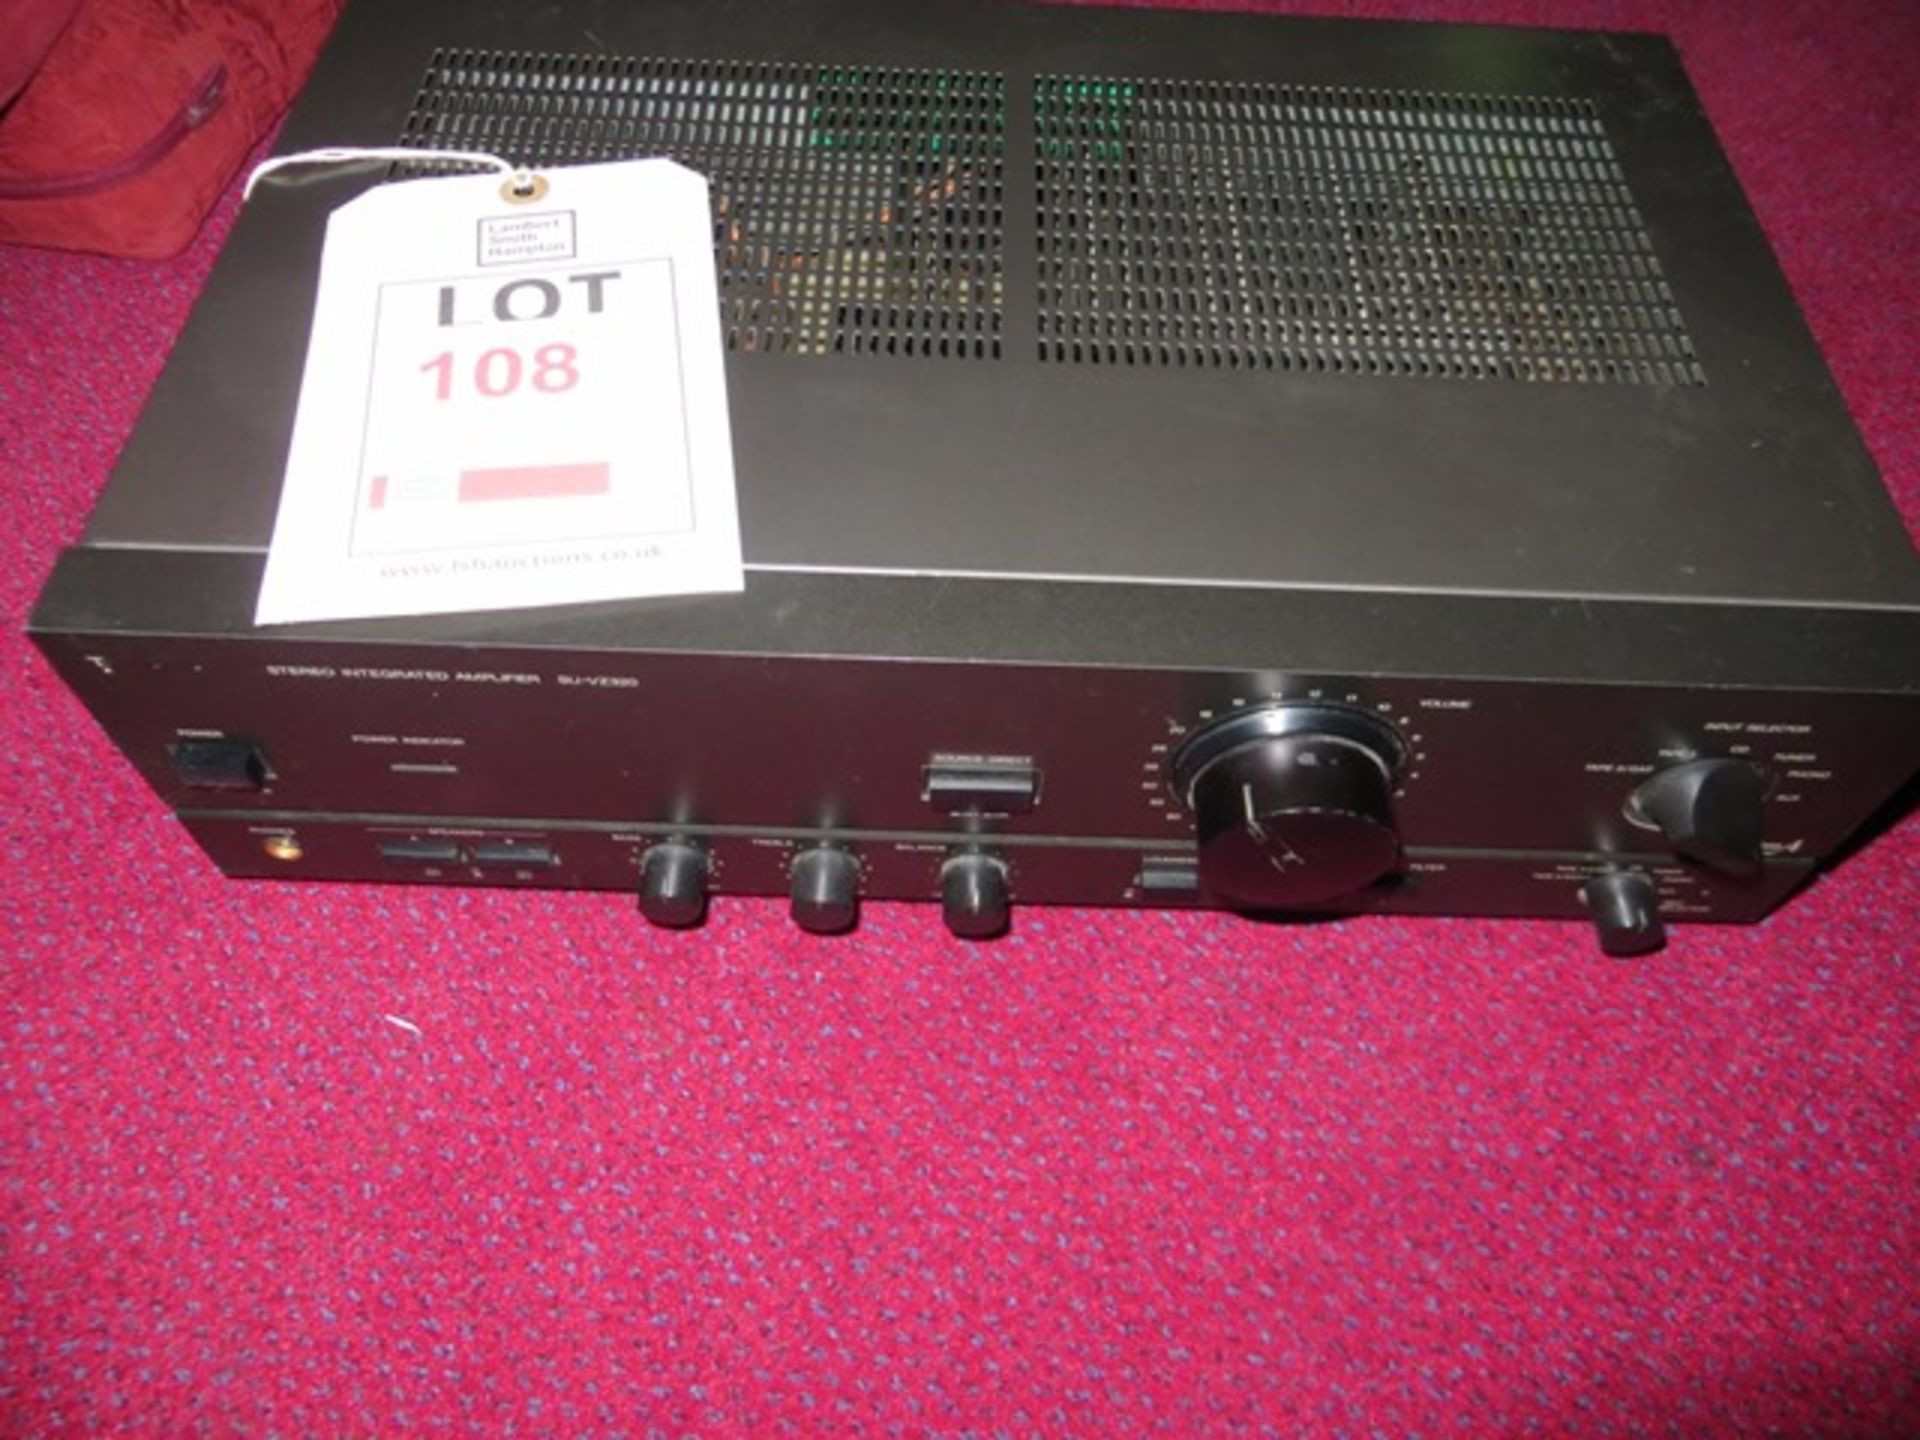 Technics Stereo Integrated amplifier, model SU-VZ320 (Please note, for viewing and collection